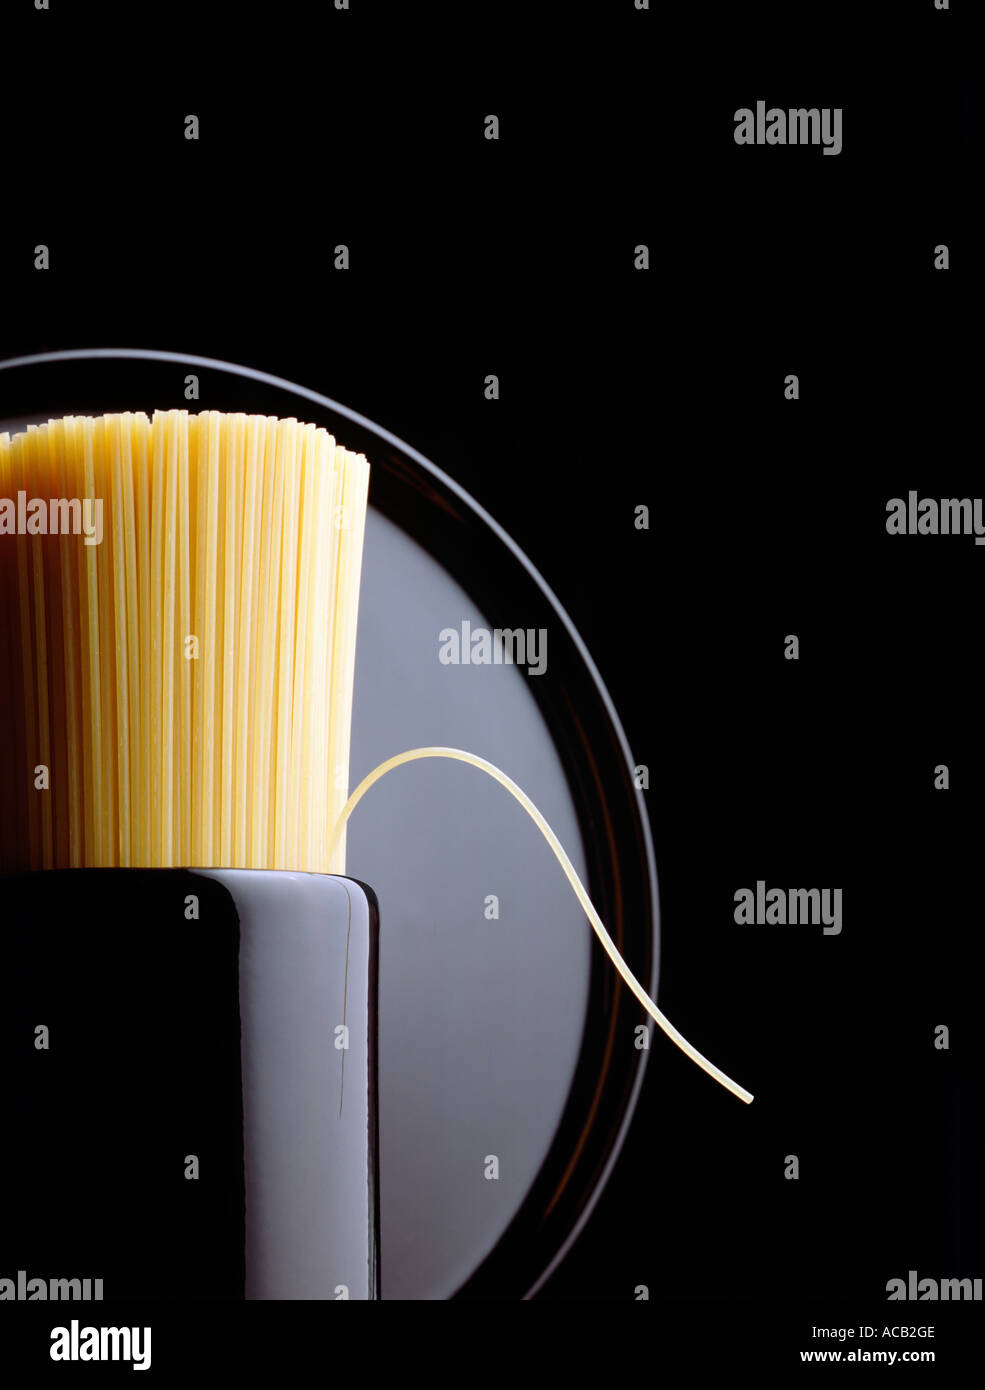 Spaghetti in black ceramic container one strand bent over plate behind Stock Photo